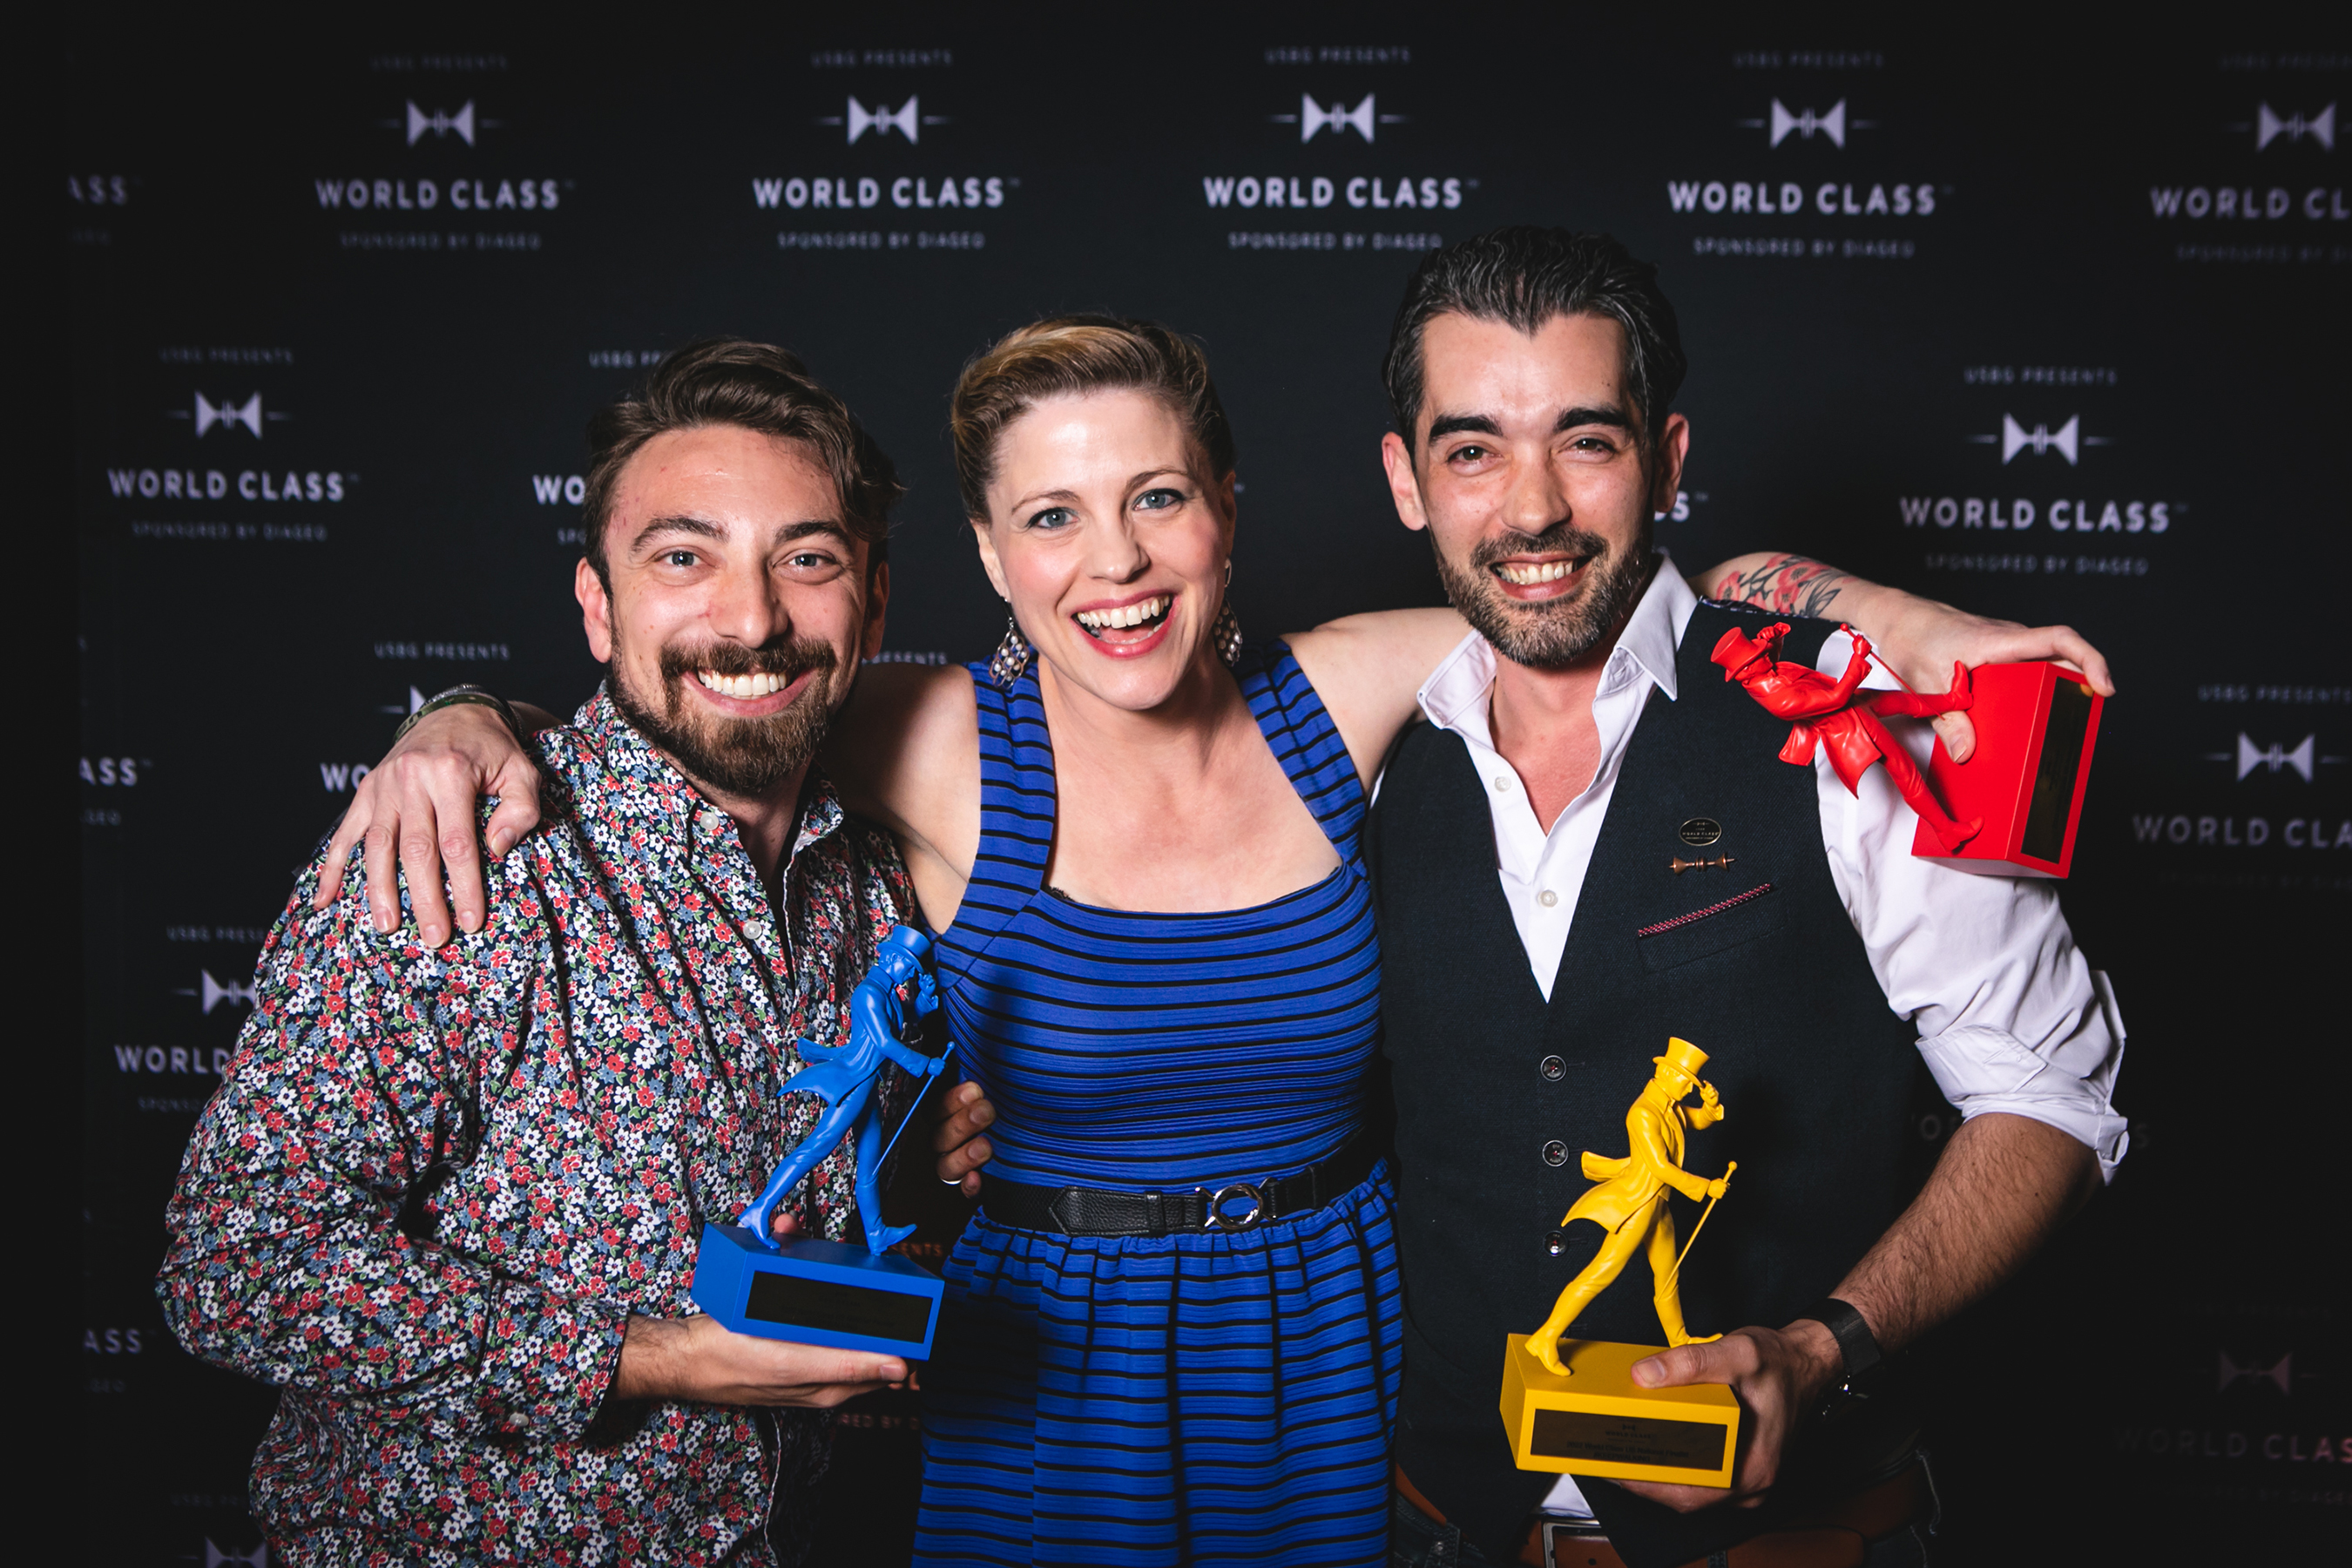 The top bartenders from the South region – Sam Penton, Kristin Amron, Nic Wallace – will gather in Nashville, TN to face off in the World Class U.S. National Finals